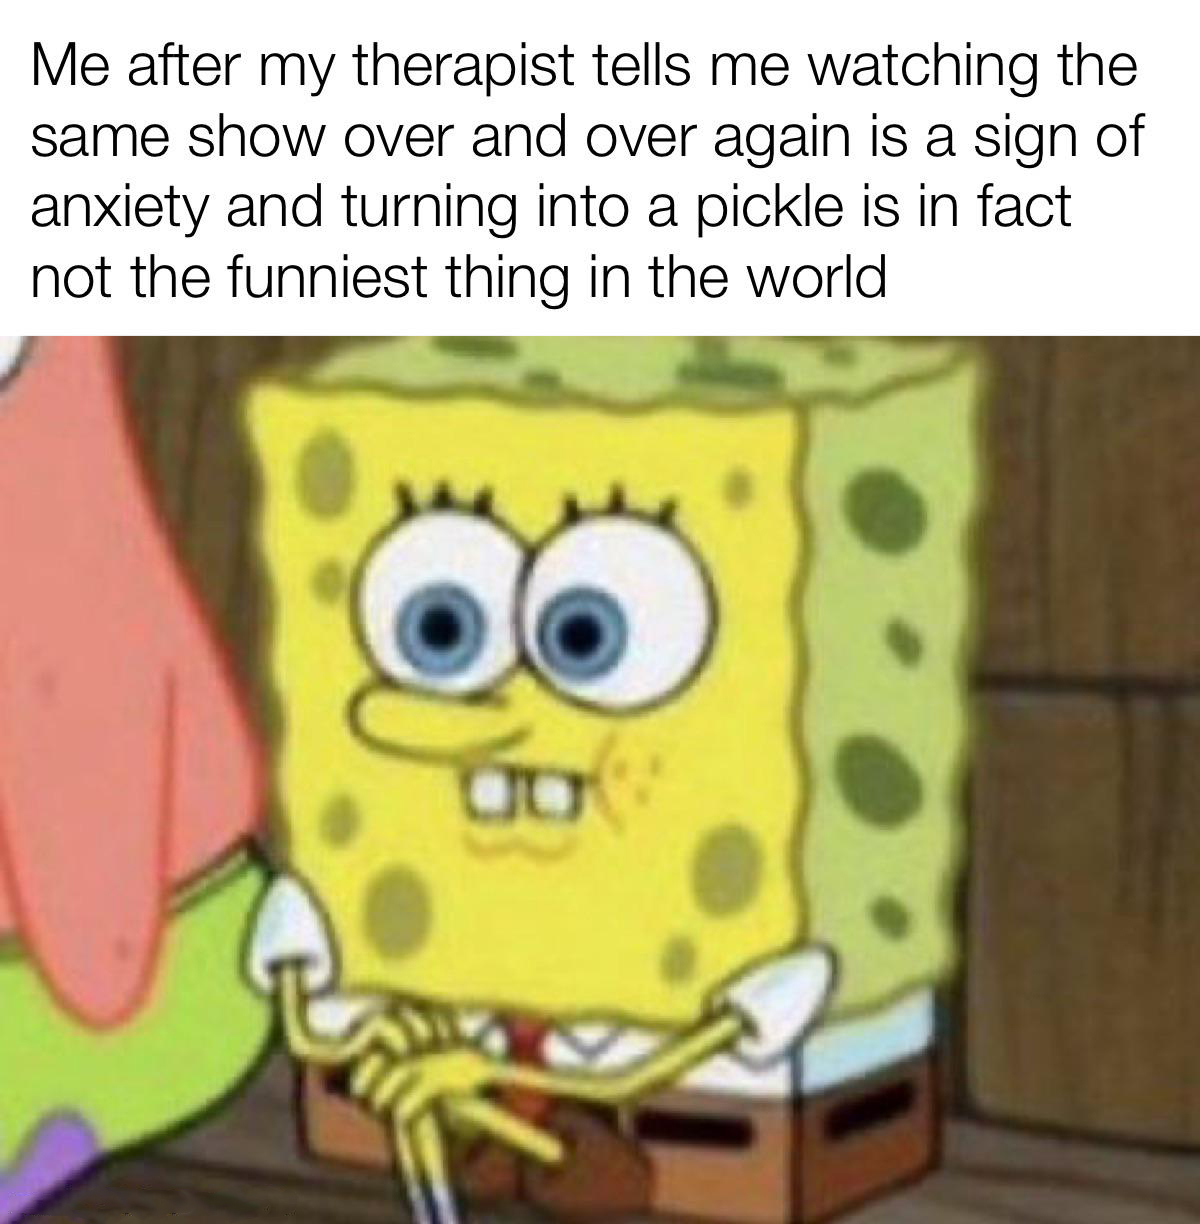 sitting on the edge of the bed meme - Me after my therapist tells me watching the same show over and over again is a sign of anxiety and turning into a pickle is in fact not the funniest thing in the world